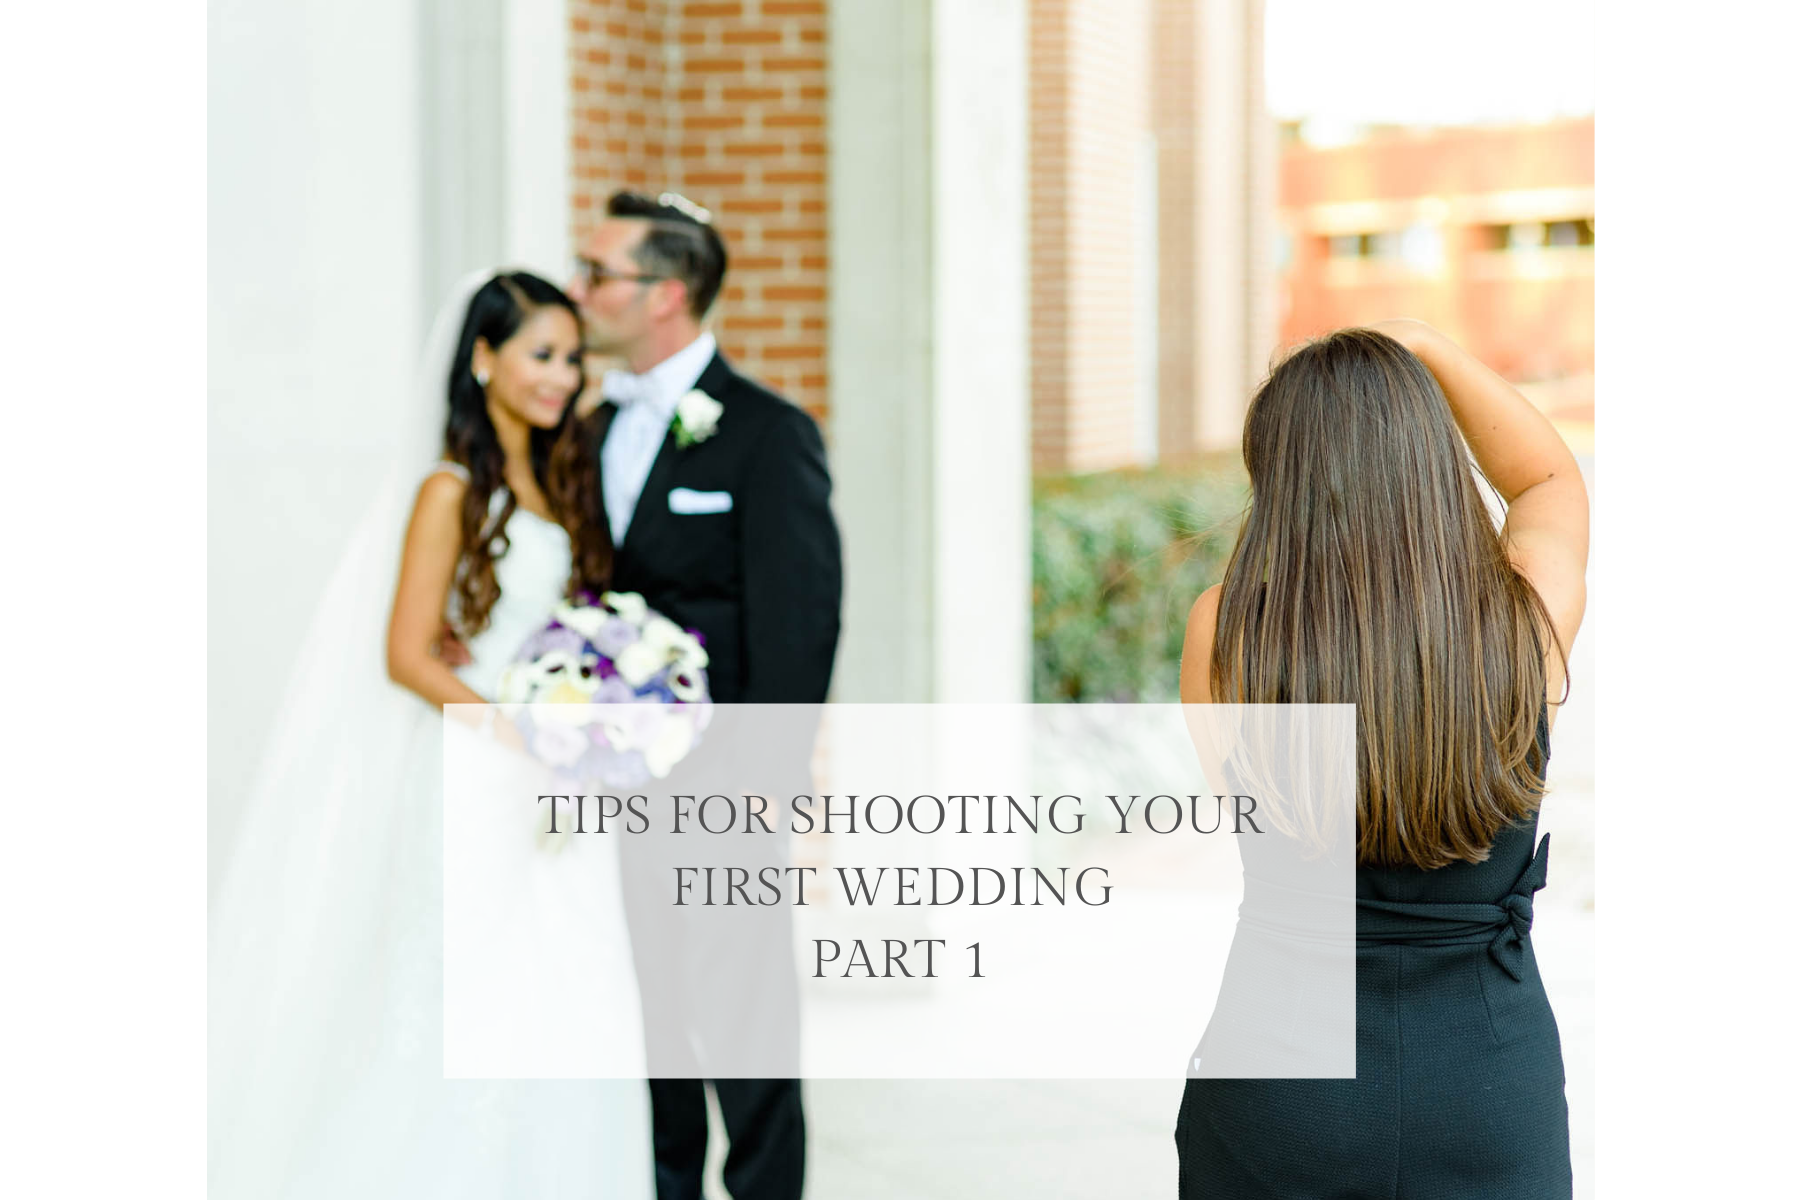 Tips for photographing your first wedding